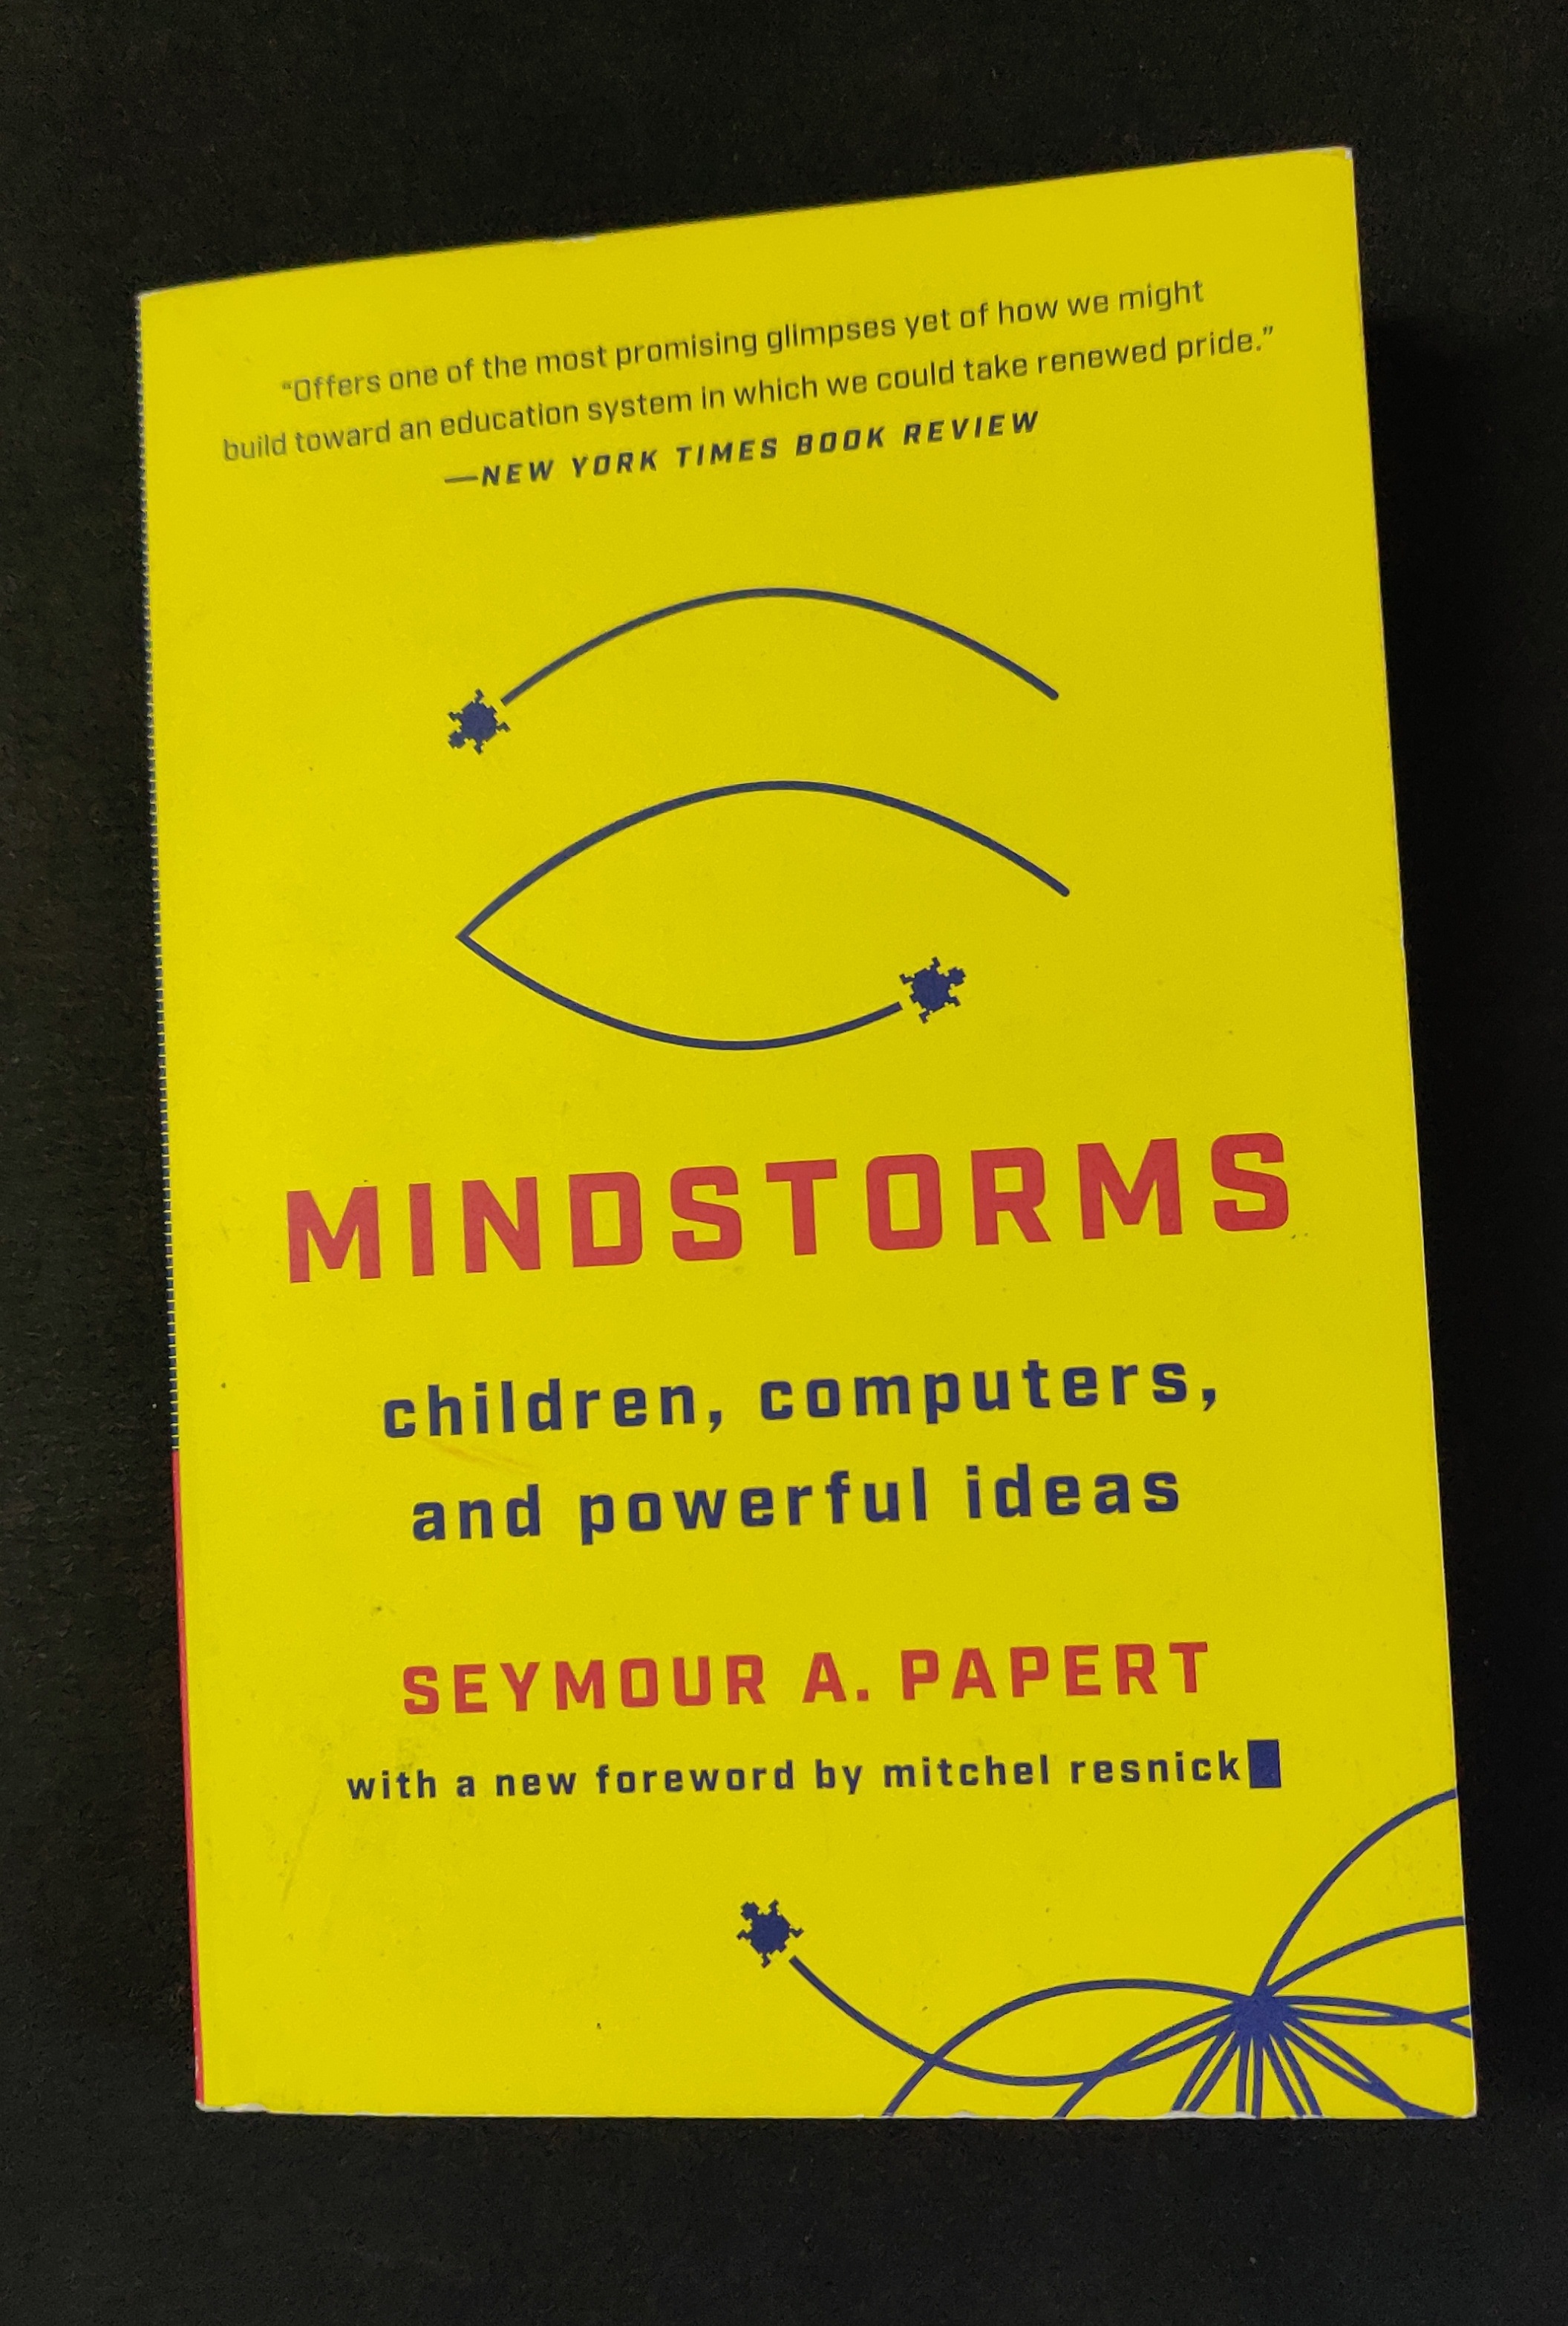 Mindstorms - children, computers and powerful ideas